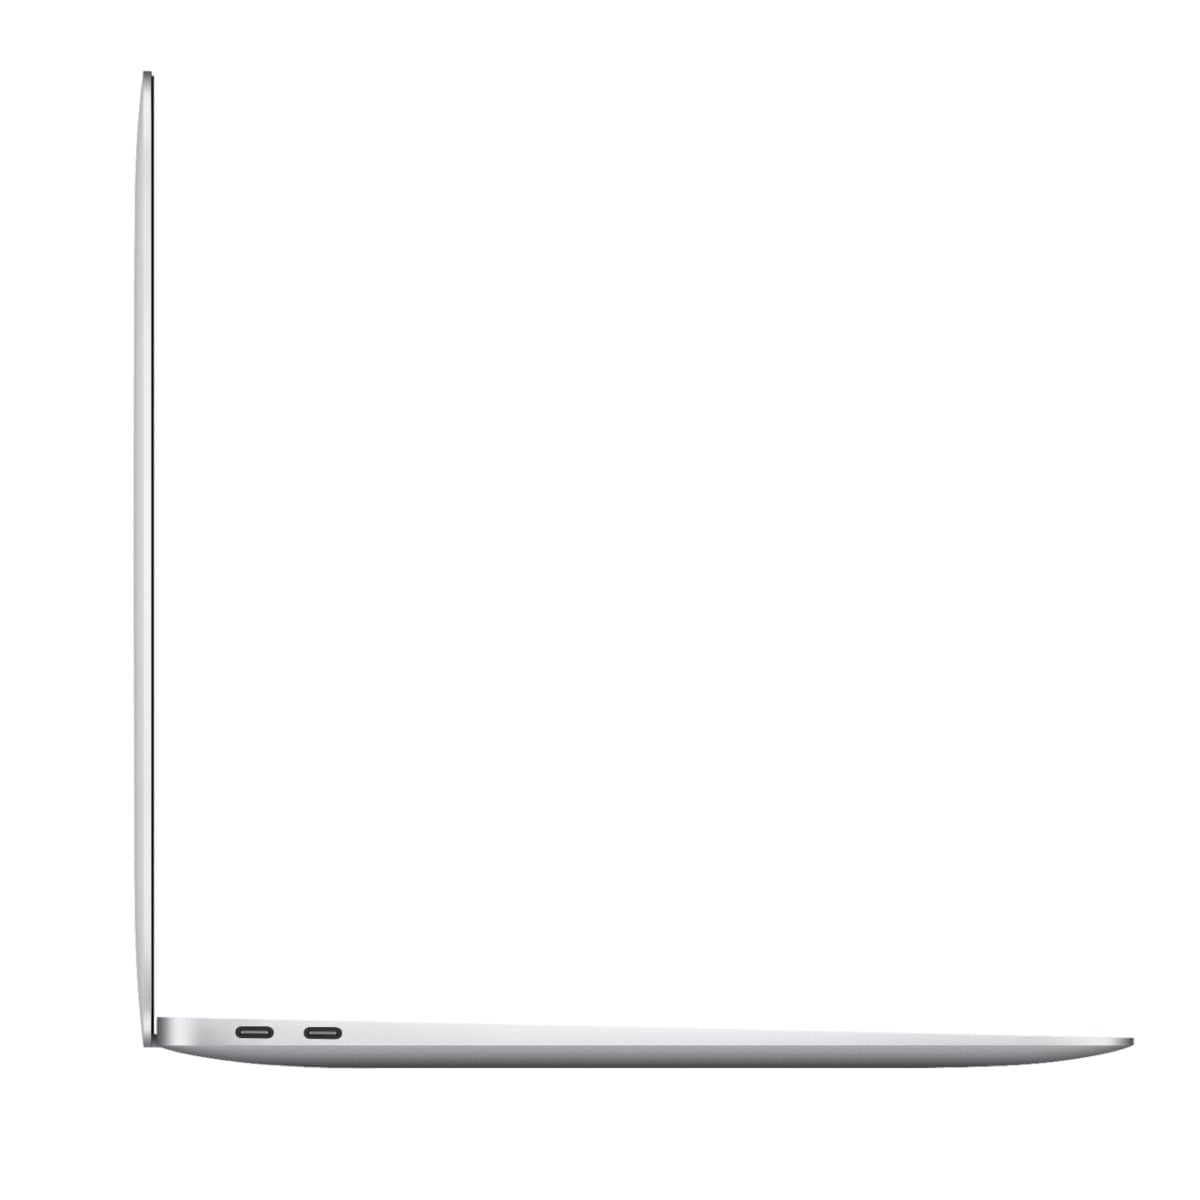 6418597Cv13D Scaled Apple &Lt;H1 Class=&Quot;Heading-5 V-Fw-Regular&Quot;&Gt;Macbook Air 13.3&Quot; Laptop - Apple M1 Chip - 8Gb Memory - 256Gb Ssd (Latest Model) - Silver (English Keyboard)&Lt;/H1&Gt; Https://Www.youtube.com/Watch?V=Hs1Hols4Sd0 Apple’s Thinnest And Lightest Notebook Gets Supercharged With The Apple M1 Chip. Tackle Your Projects With The Blazing-Fast 8-Core Cpu. Take Graphics-Intensive Apps And Games To The Next Level With The 7-Core Gpu. And Accelerate Machine Learning Tasks With The 16-Core Neural Engine. All With A Silent, Fanless Design And The Longest Battery Life Ever — Up To 18 Hours. Macbook Air. Still Perfectly Portable. Just A Lot More Powerful. Apple Macbook Air 13 Apple Macbook Air 13&Quot; Laptop - Apple M1 Chip - 8Gb Memory - 256Gb Ssd (Mgn93 ) - Silver